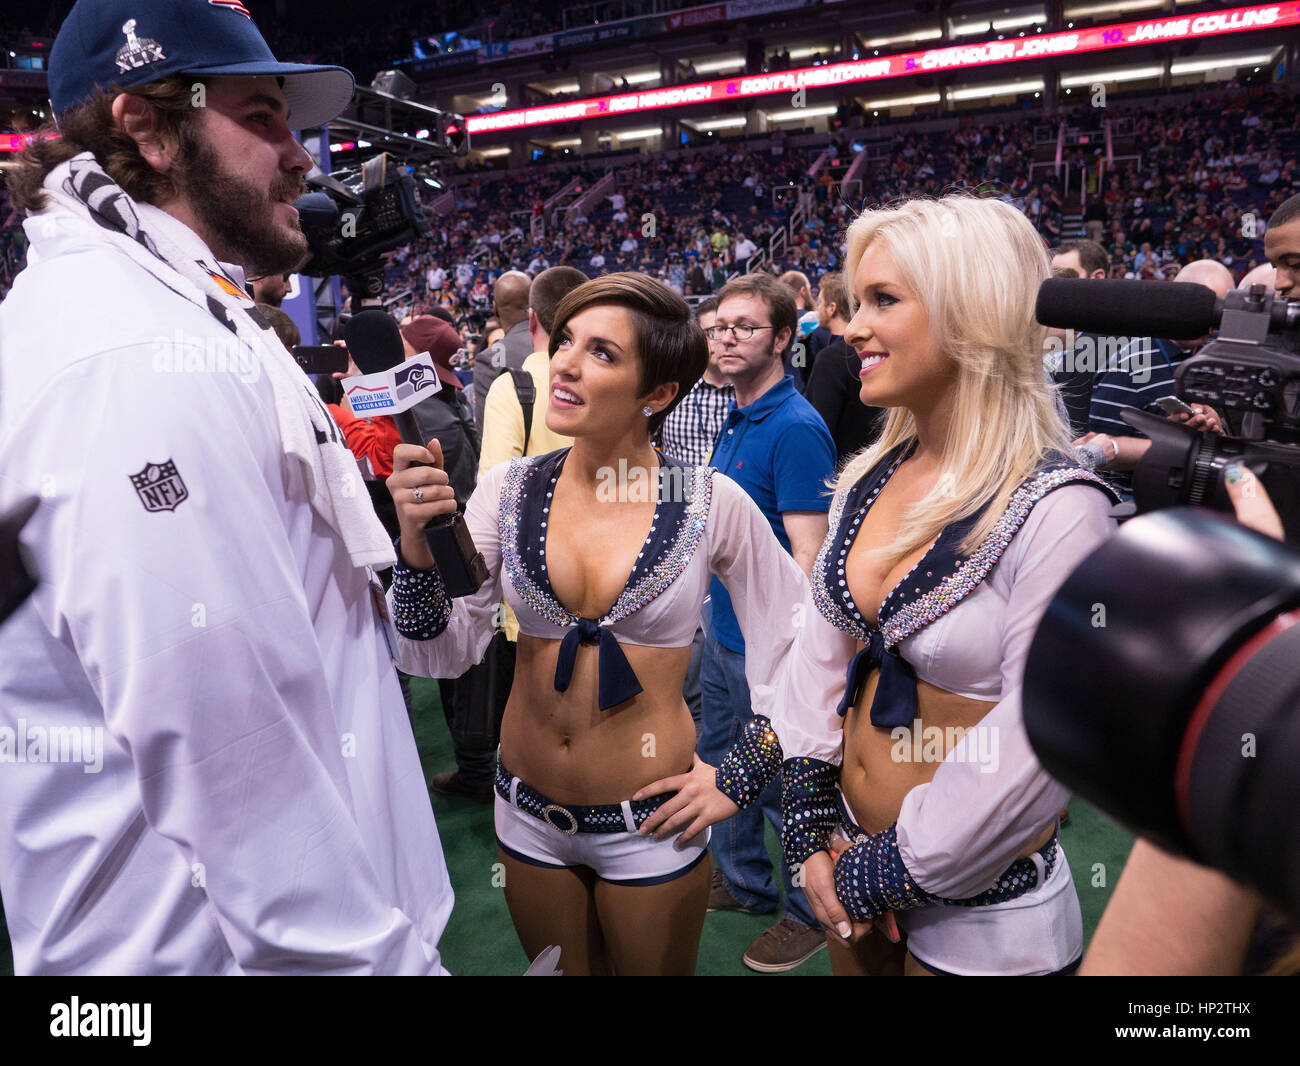 Patriots Danny Aiken, left, is interviewed by Seattle Seahawks cheerleaders on Super Bowl Media Day on January 27, 2015 in Phoenix, Arizona. Photo by Francis Specker Stock Photo